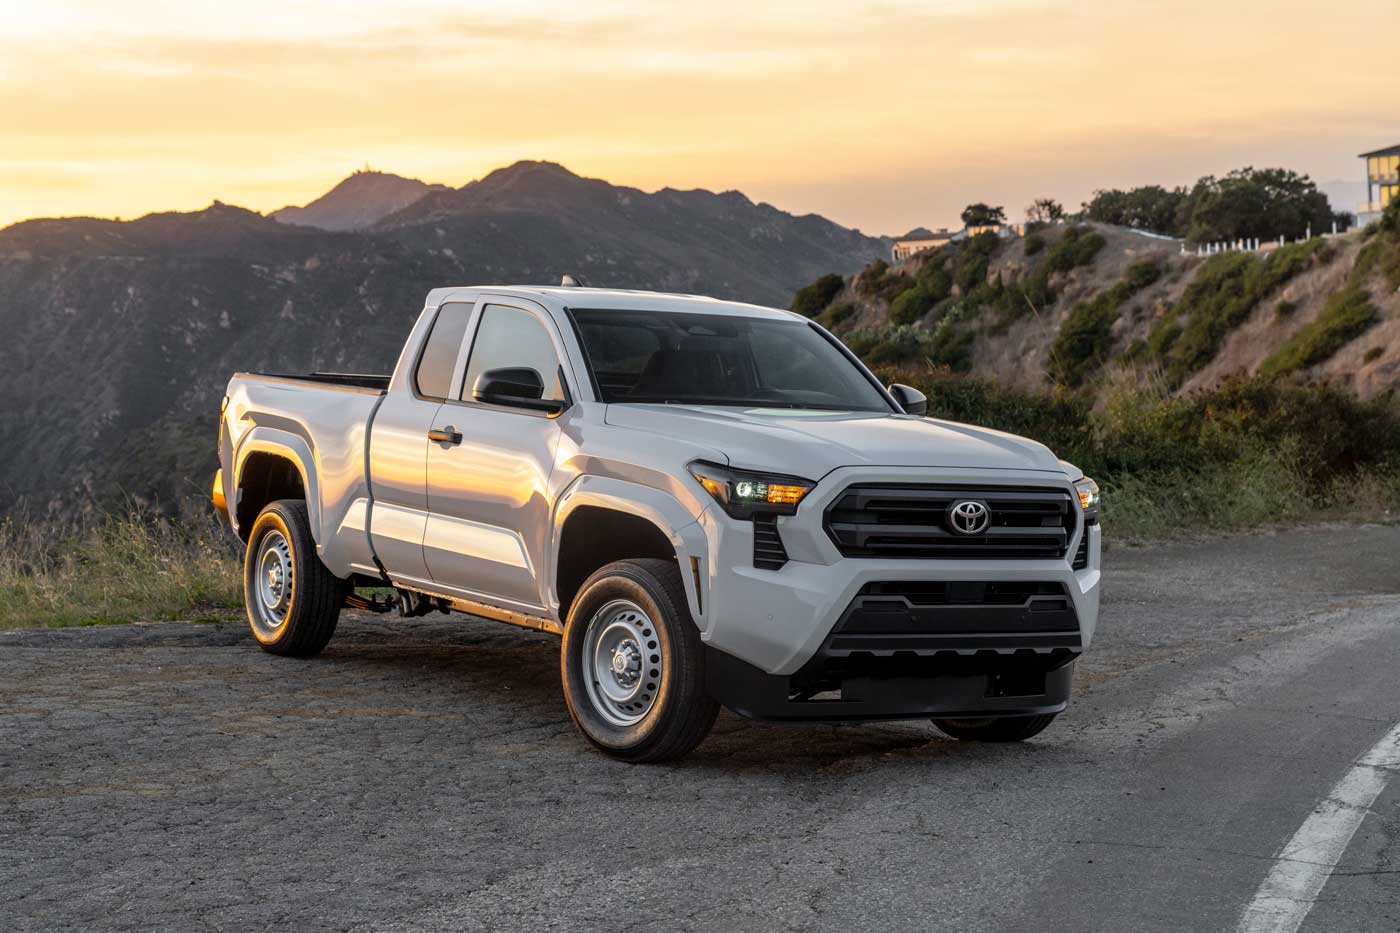 Tacoma and Tundra Pickups to Go Electric